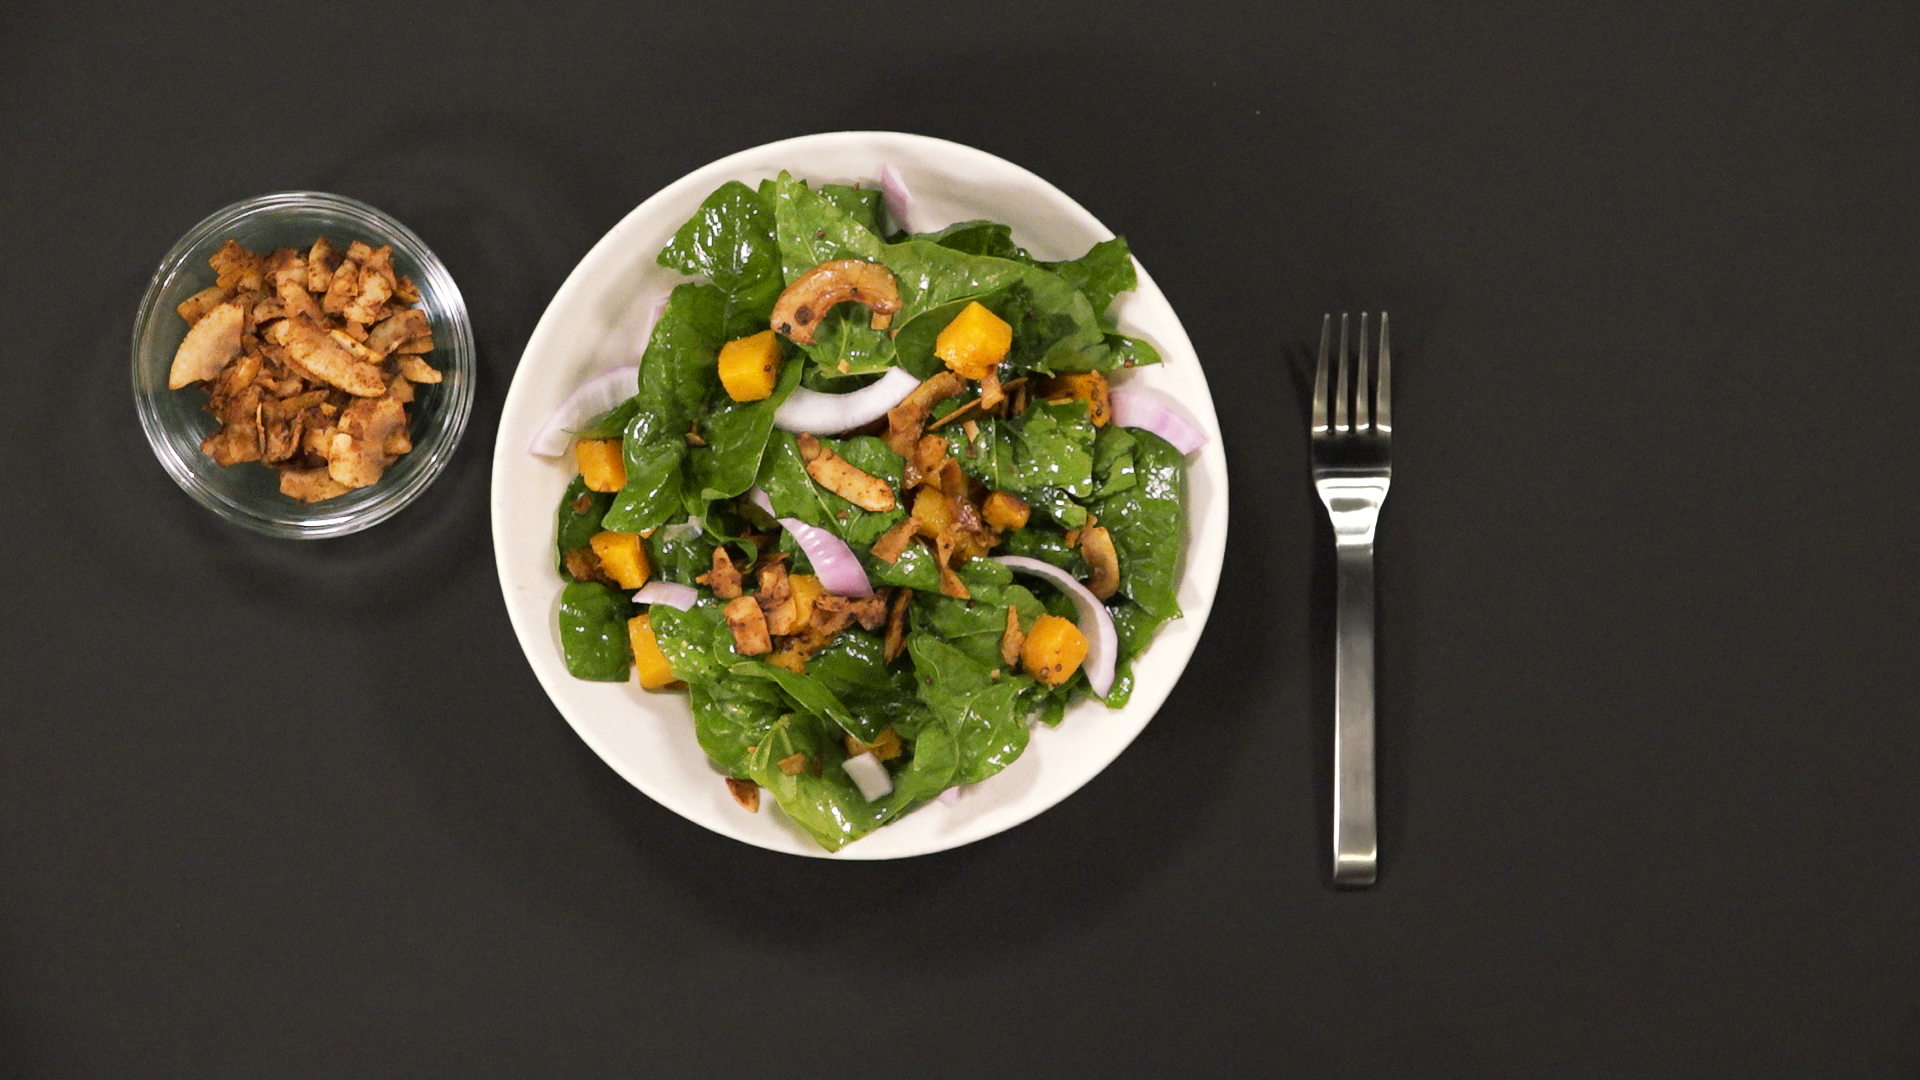 How to Make Danny Seo's Wilted Spinach Salad with Coconut Bacon